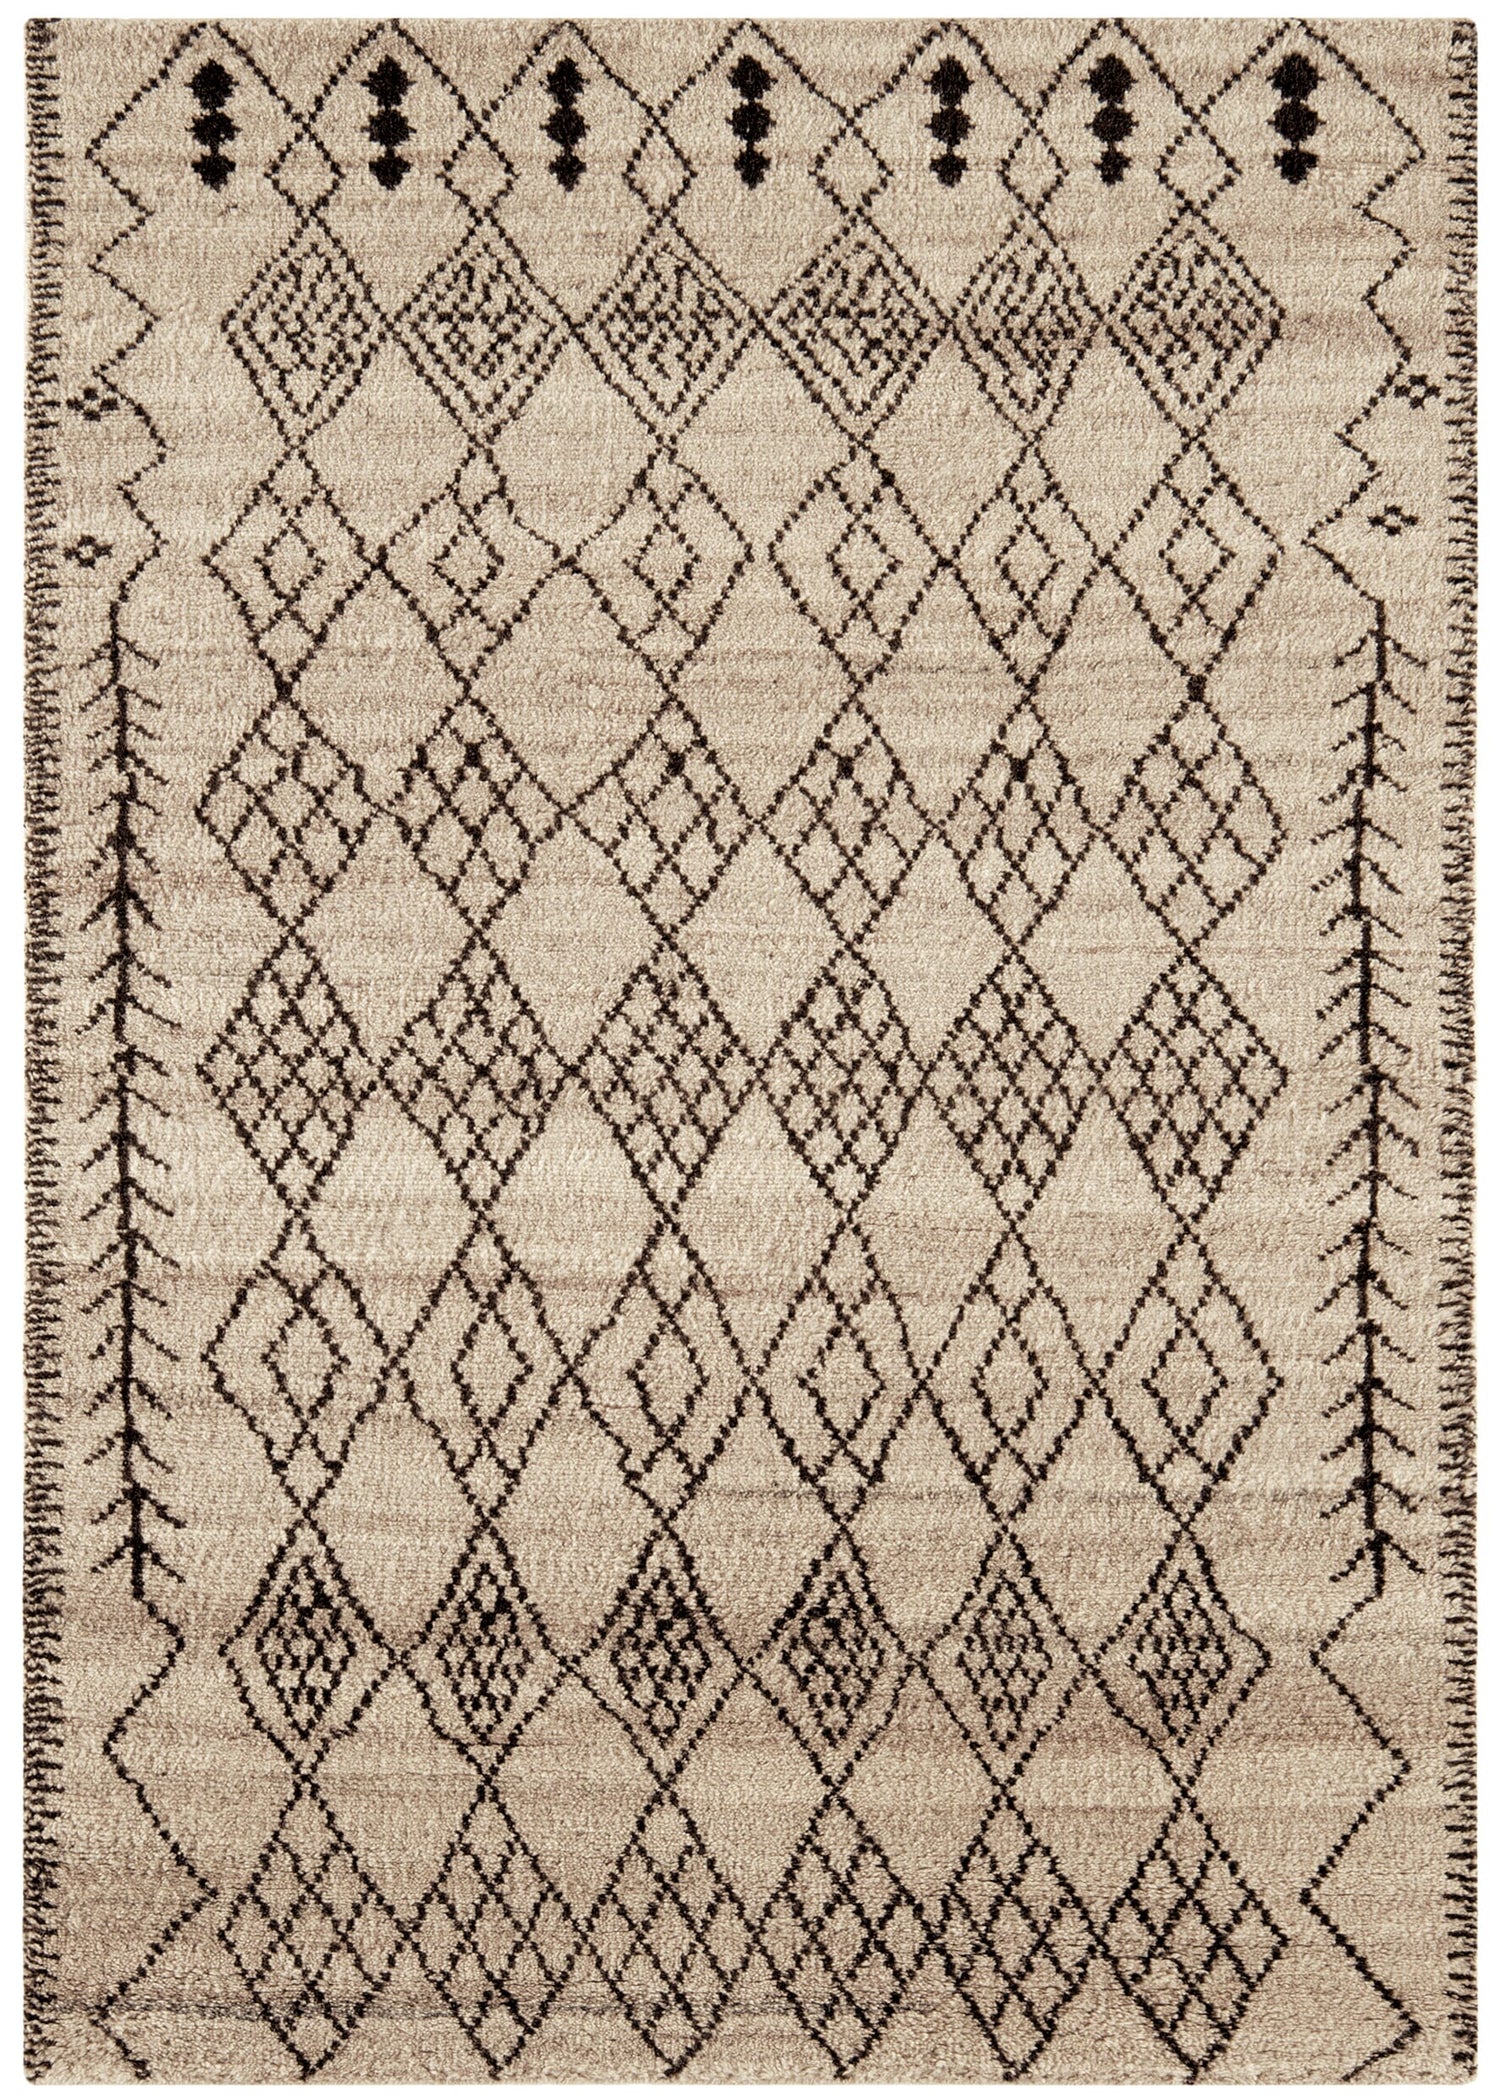  Asiatic Carpets-Asiatic Carpets Amira Hand Knotted Rug AM01 - 120 x 170cm-Beige, Natural 285 